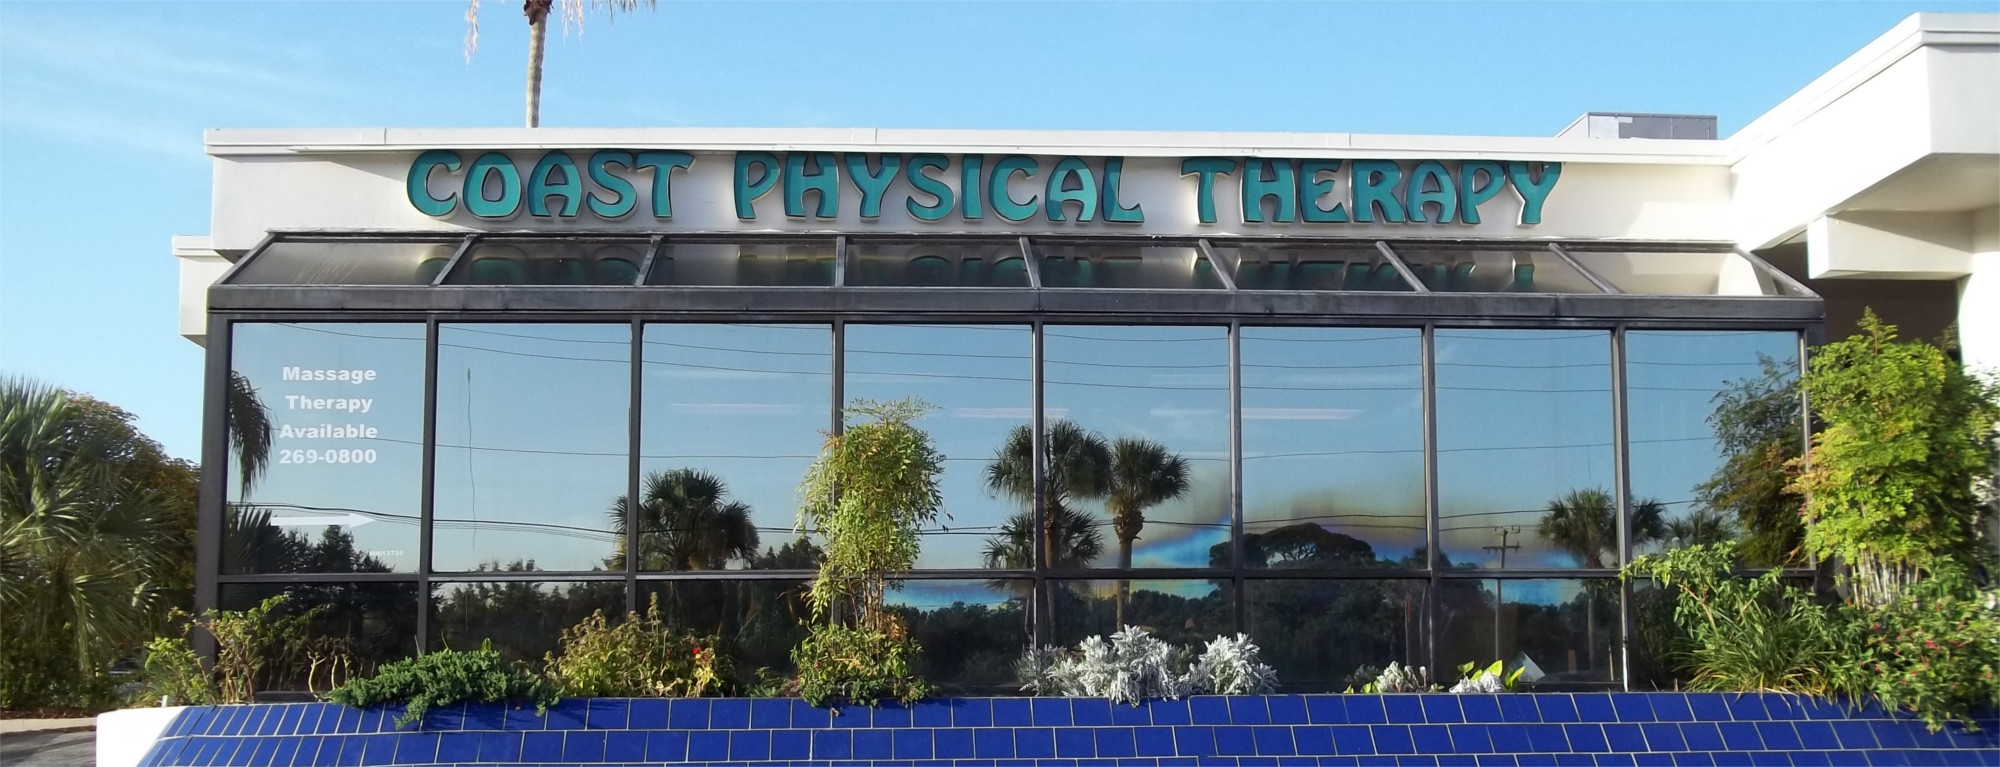 Coast Physical Therapy Clinic and Facility, View from Outside